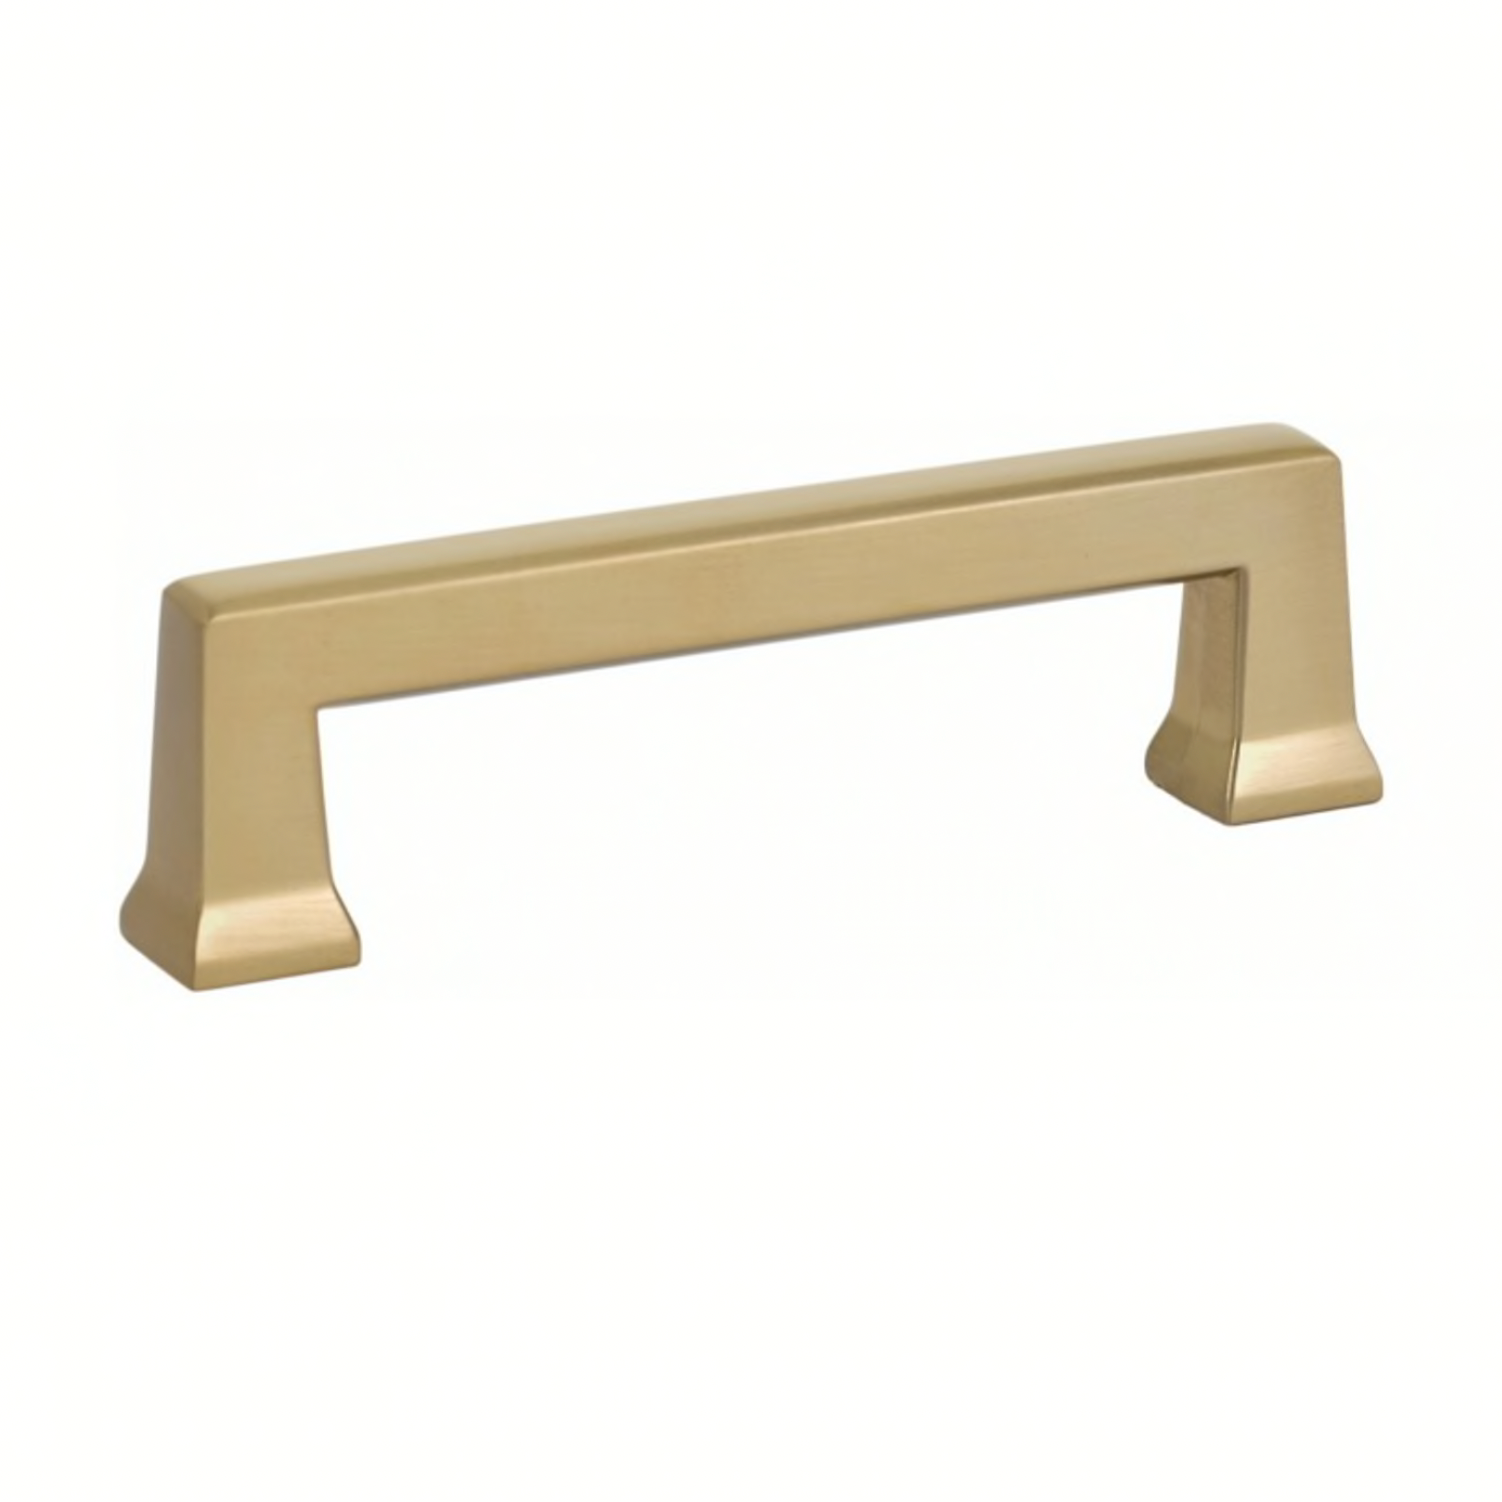 Champagne Bronze "Deco" Cabinet Knobs and Drawer Pulls